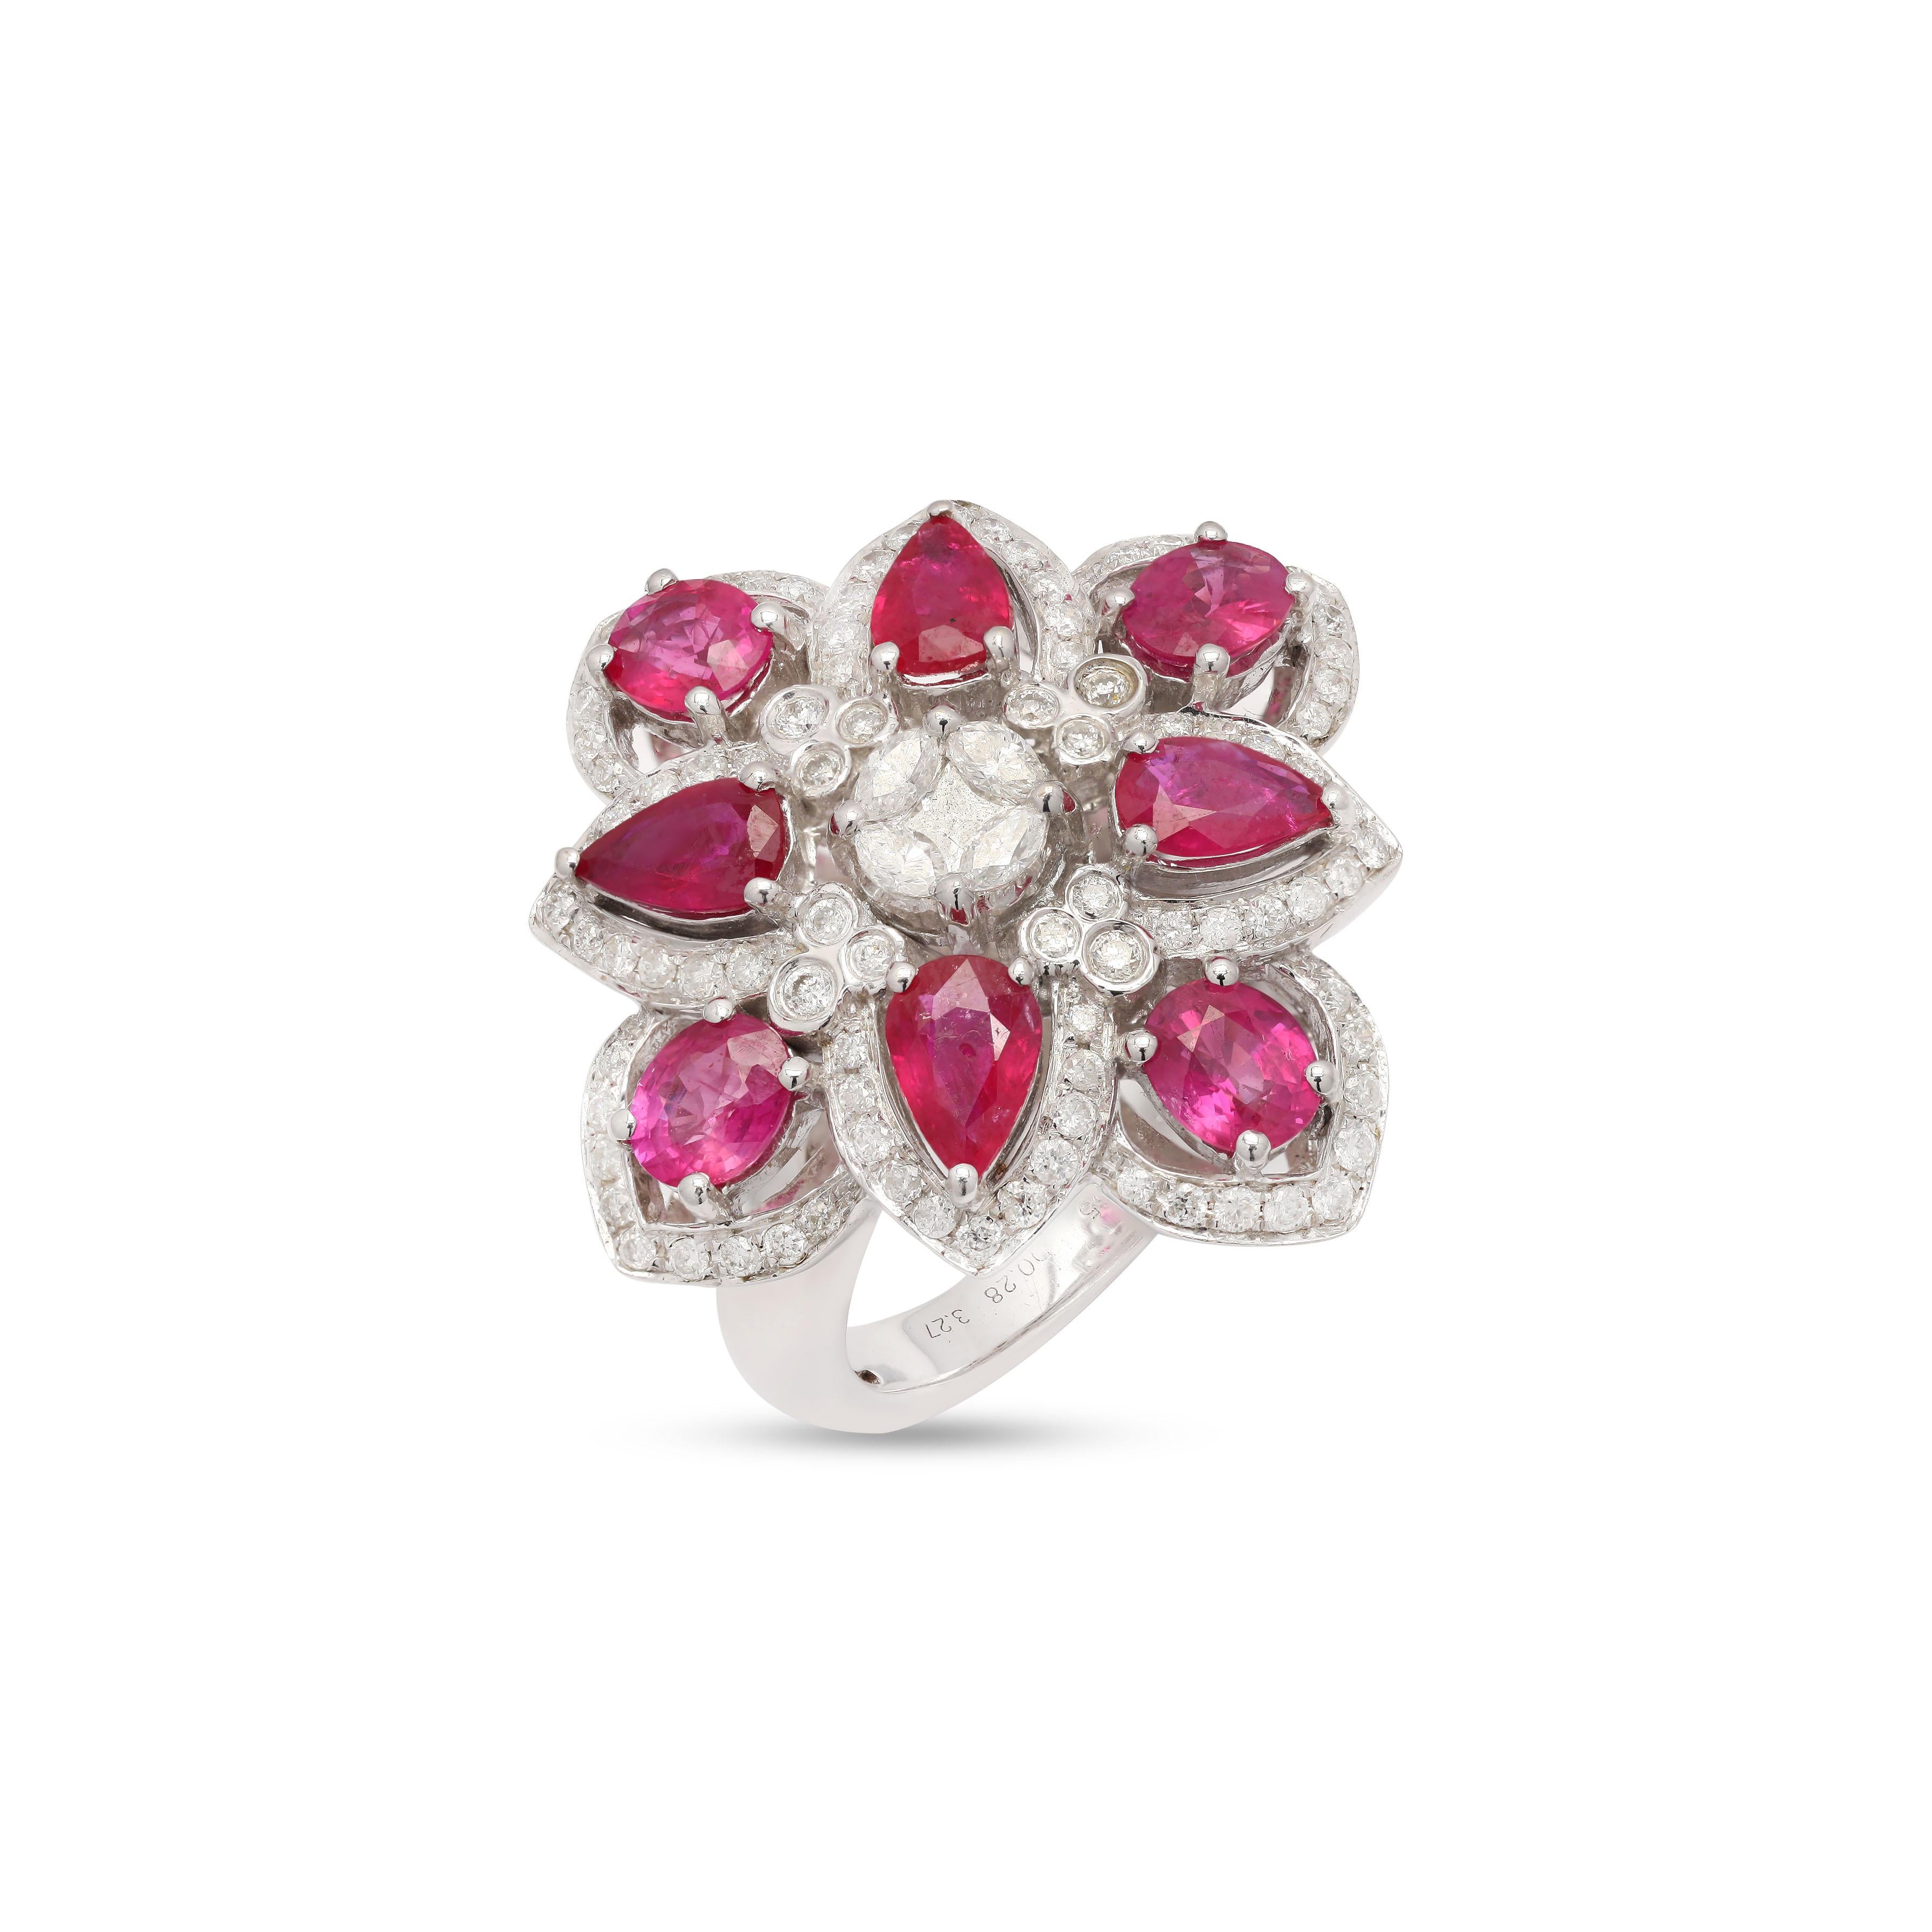 For Sale:  3.45 Carat Ruby and Diamond White Gold Ring in 14 Karat White Gold  5